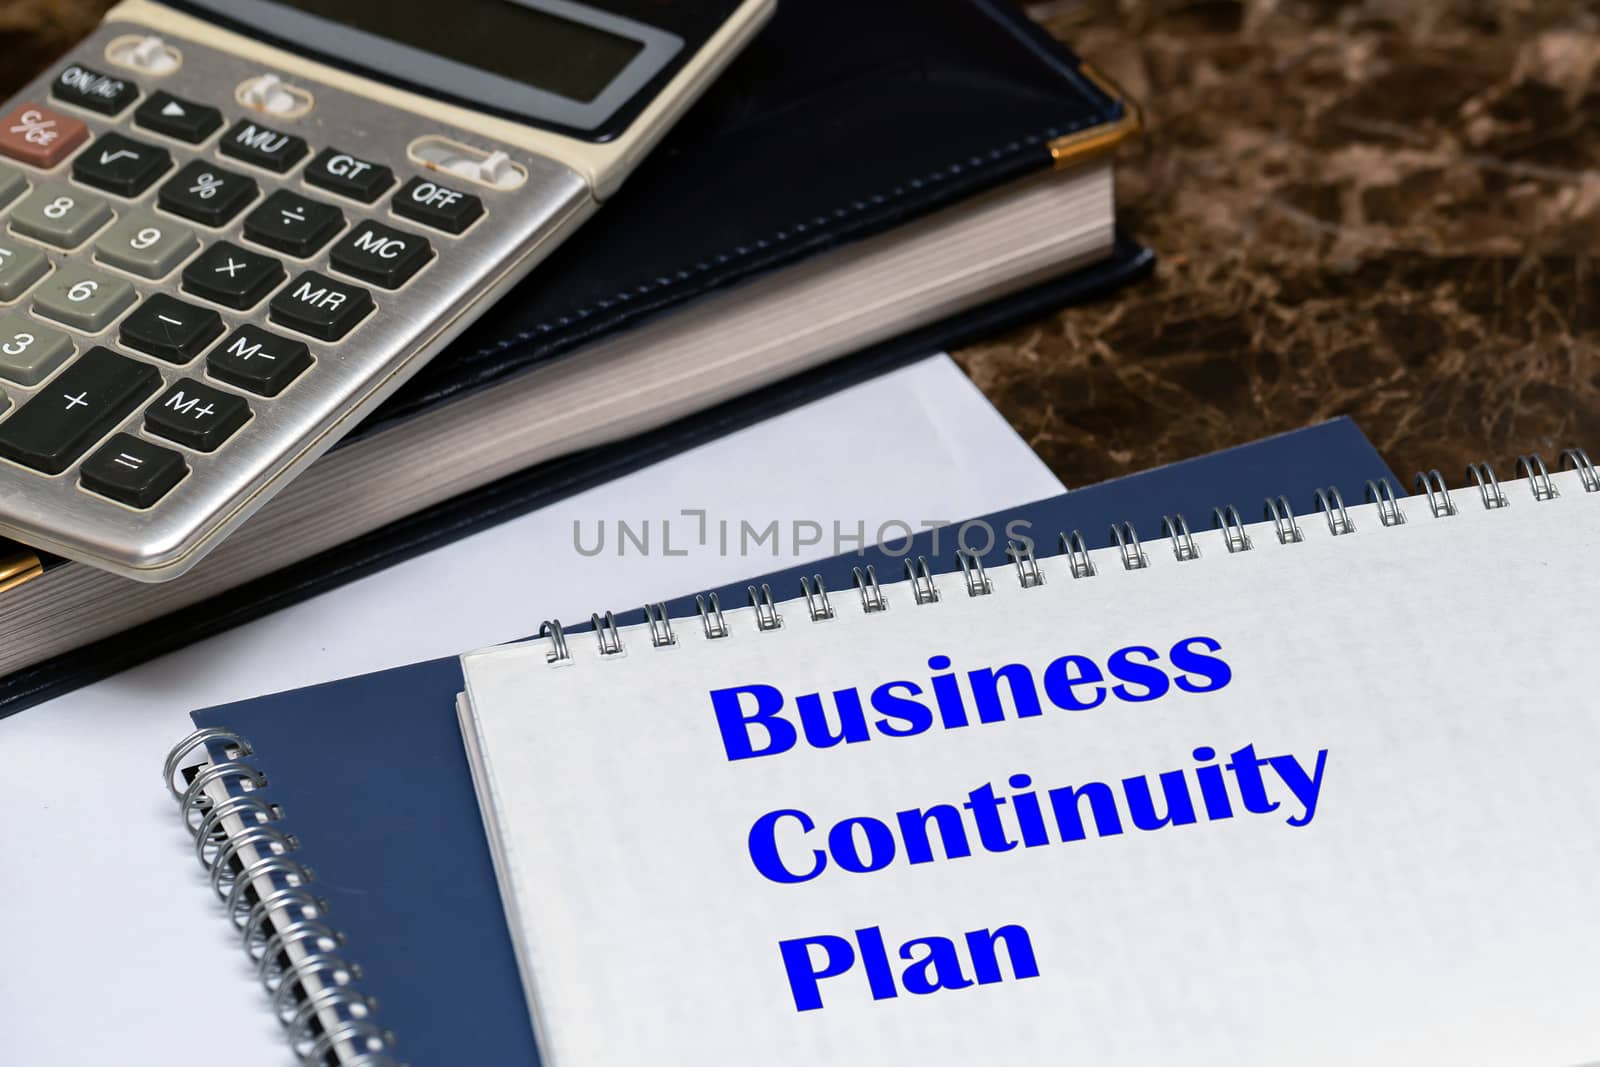 The text of the business continuity plan is written on a white sheet lying on the office Desk. by bonilook